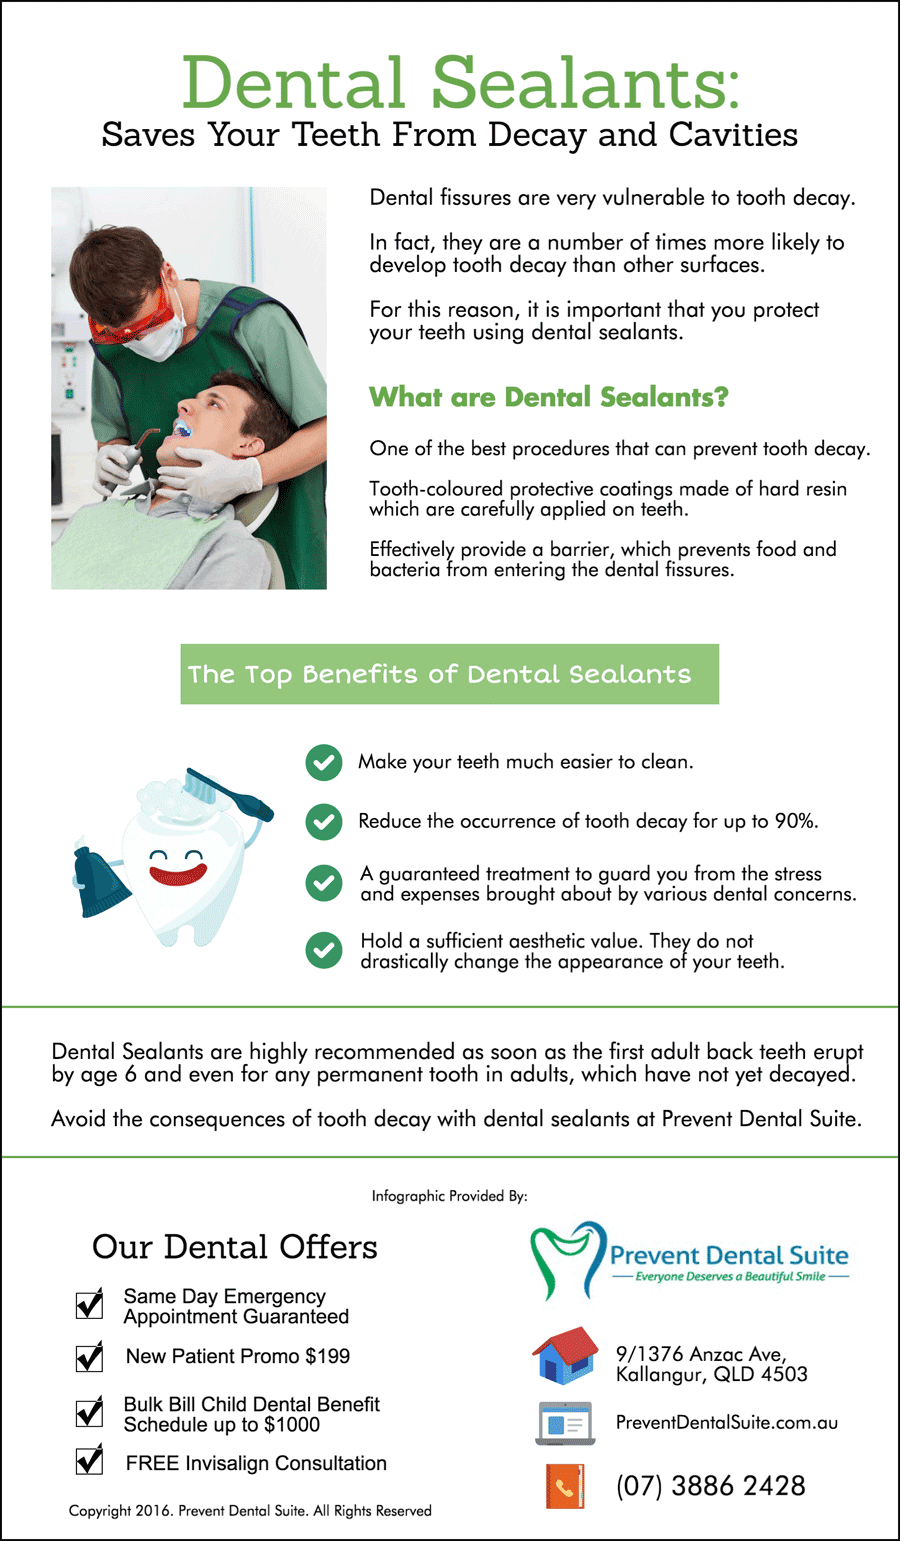 Dental Sealants: Saves Your Teeth From Decay and Cavities